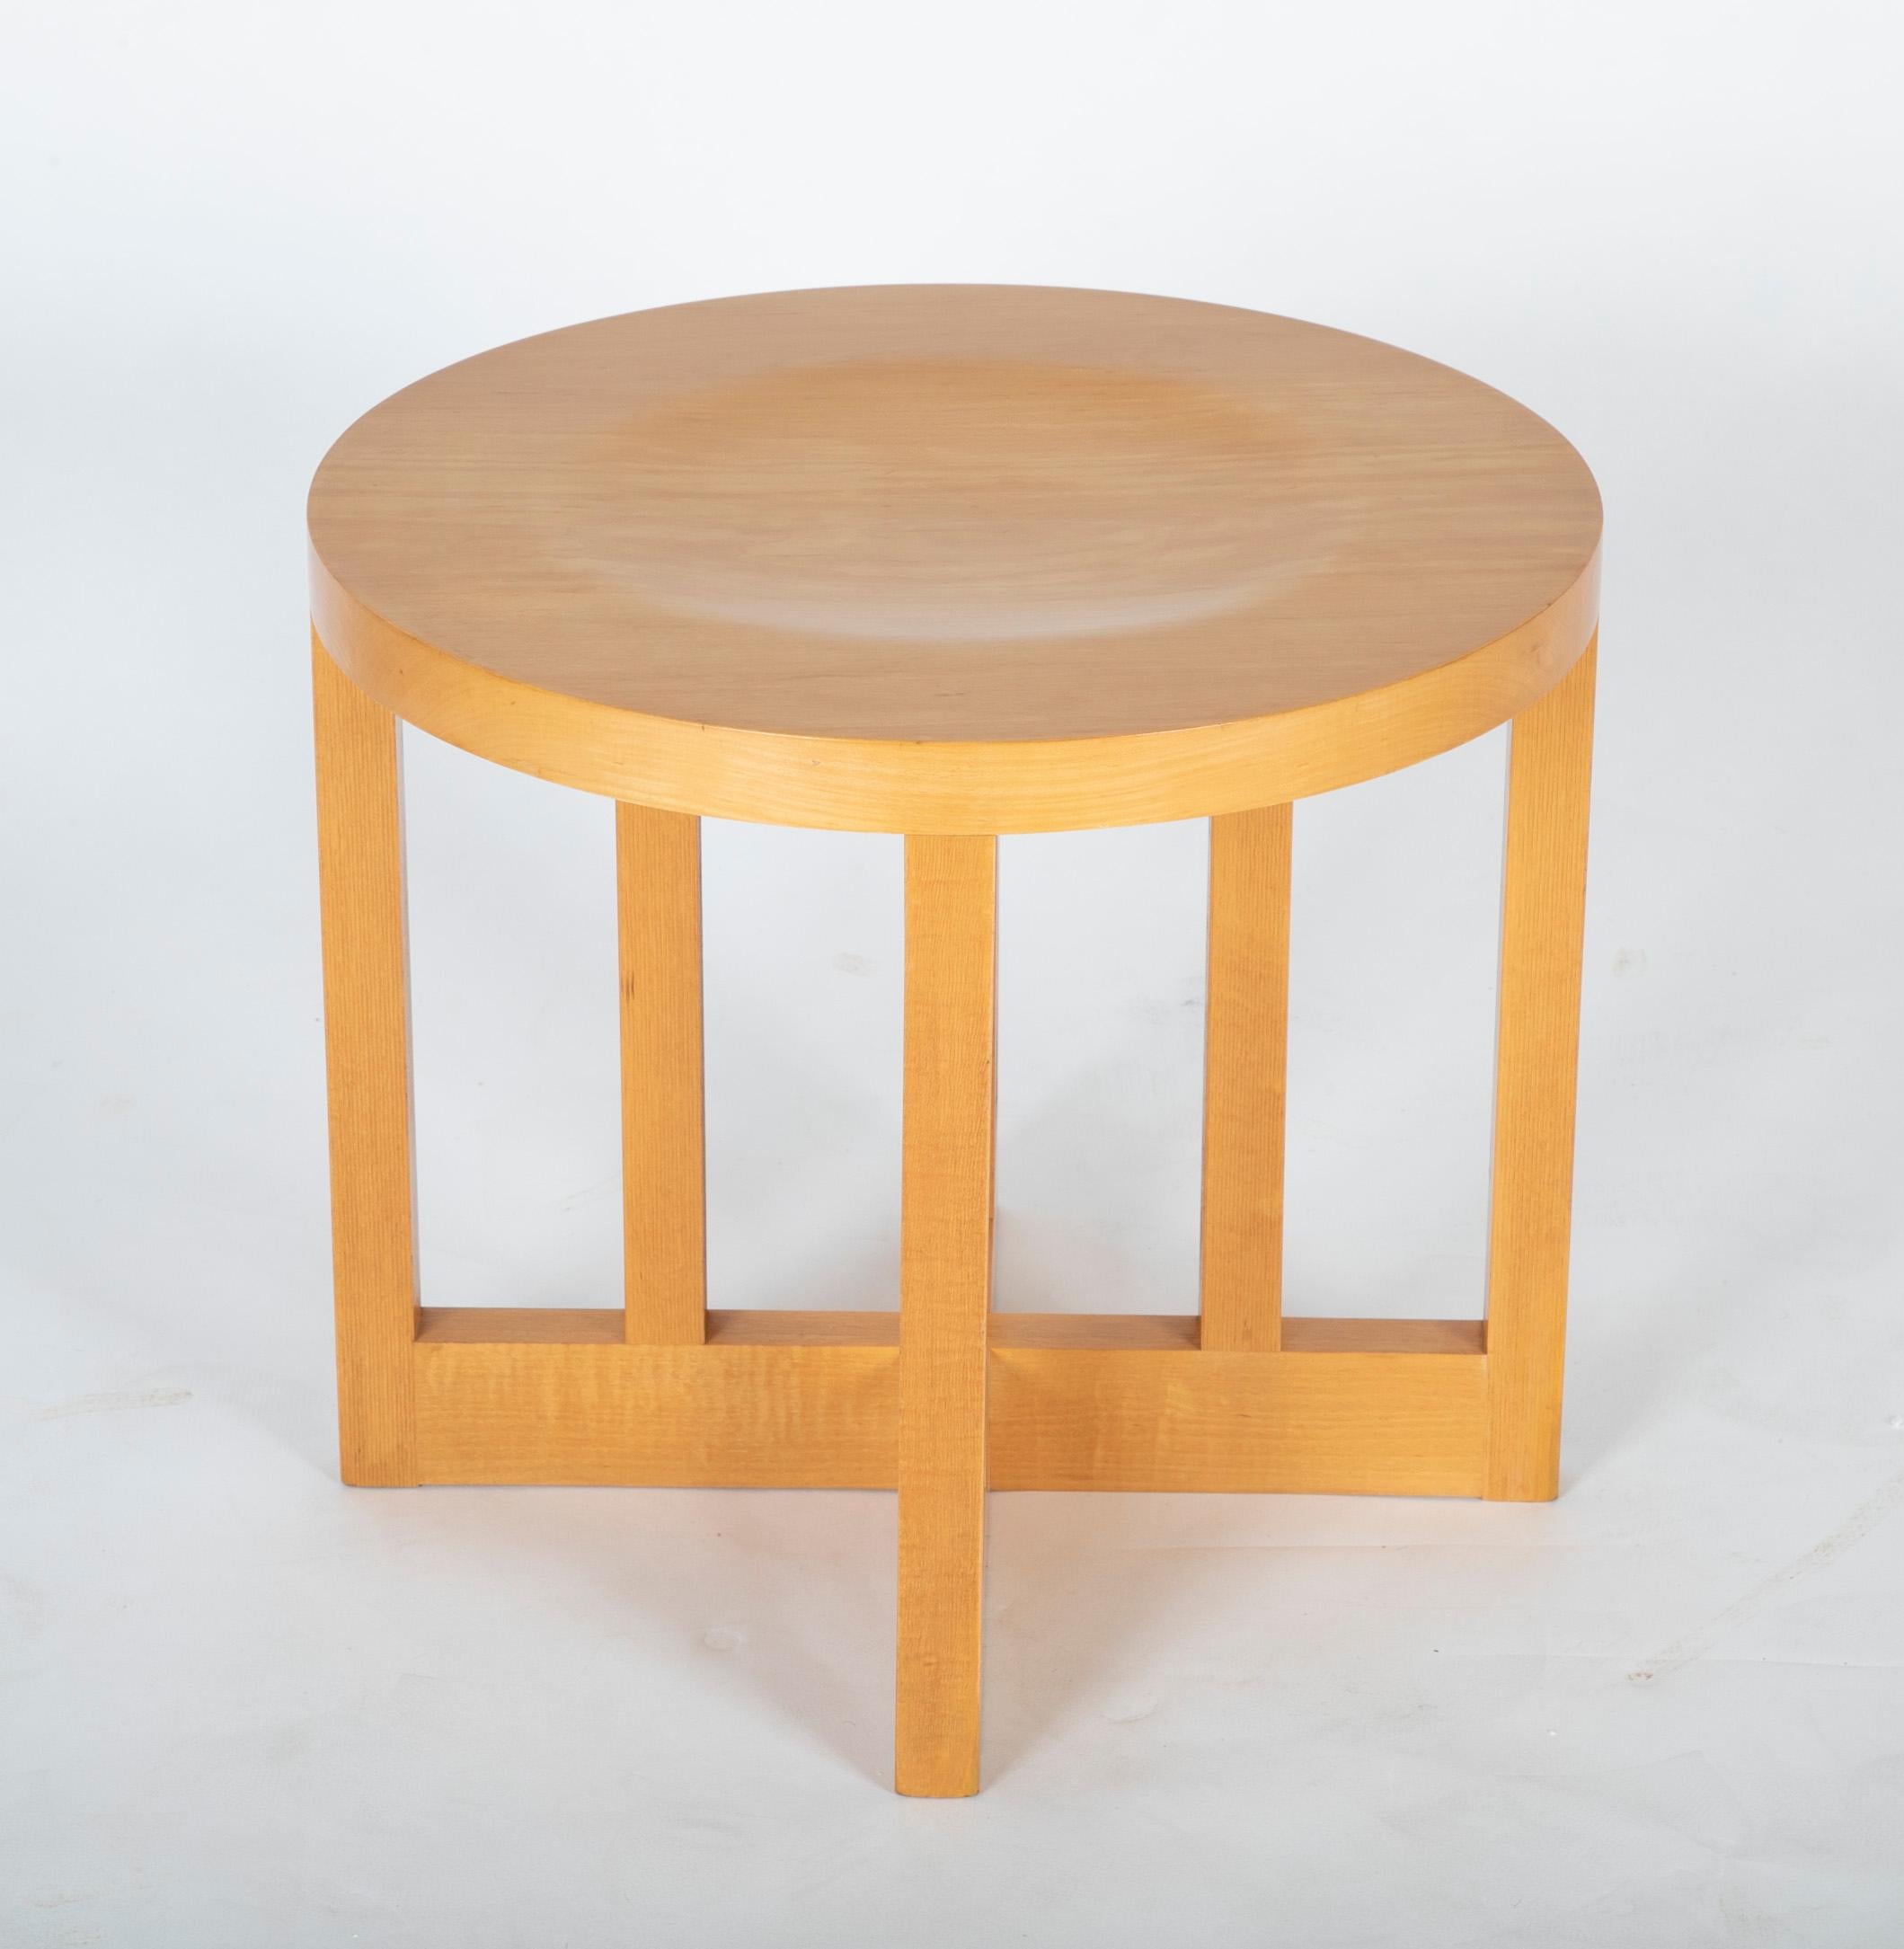 Low Side Table or Stool Designed by Richard Meier for Knoll In Good Condition For Sale In Stamford, CT